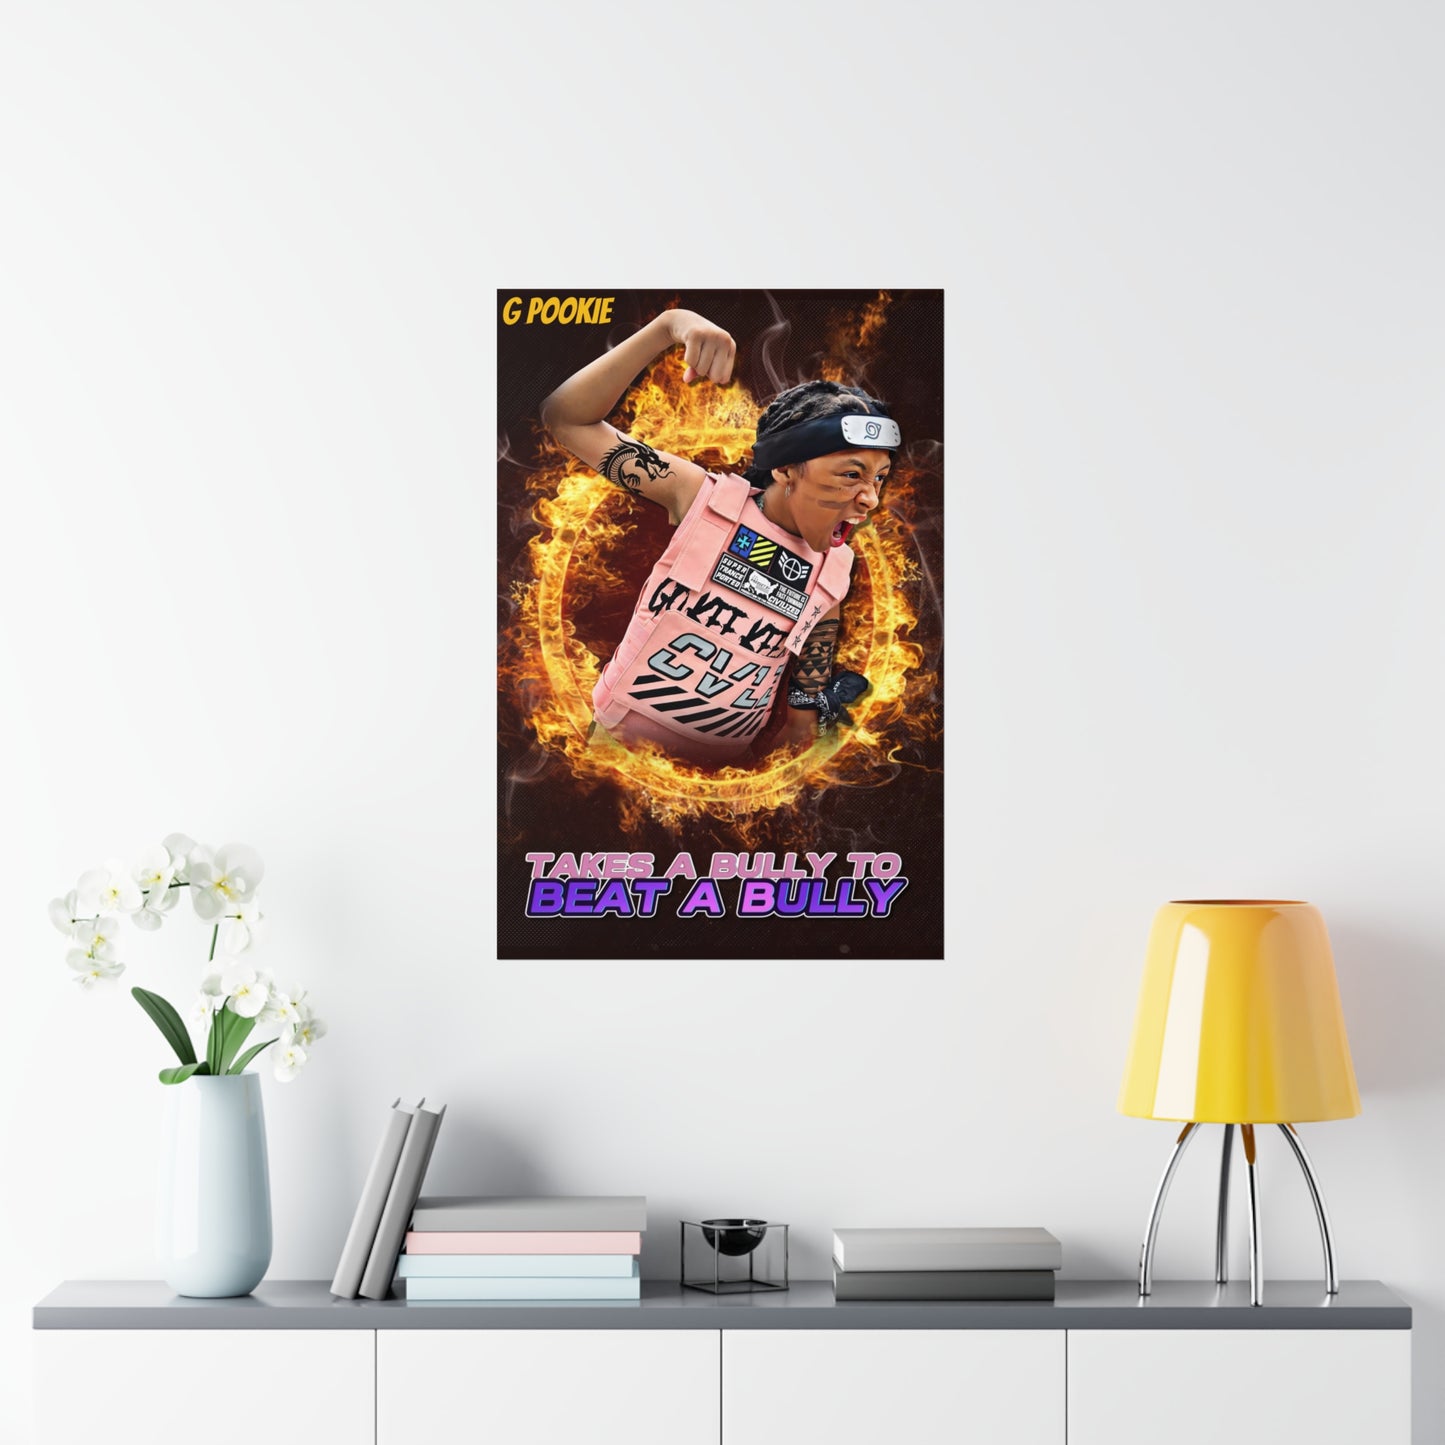 G POOKIE TAKES A BULLY Premium Matte Vertical Posters